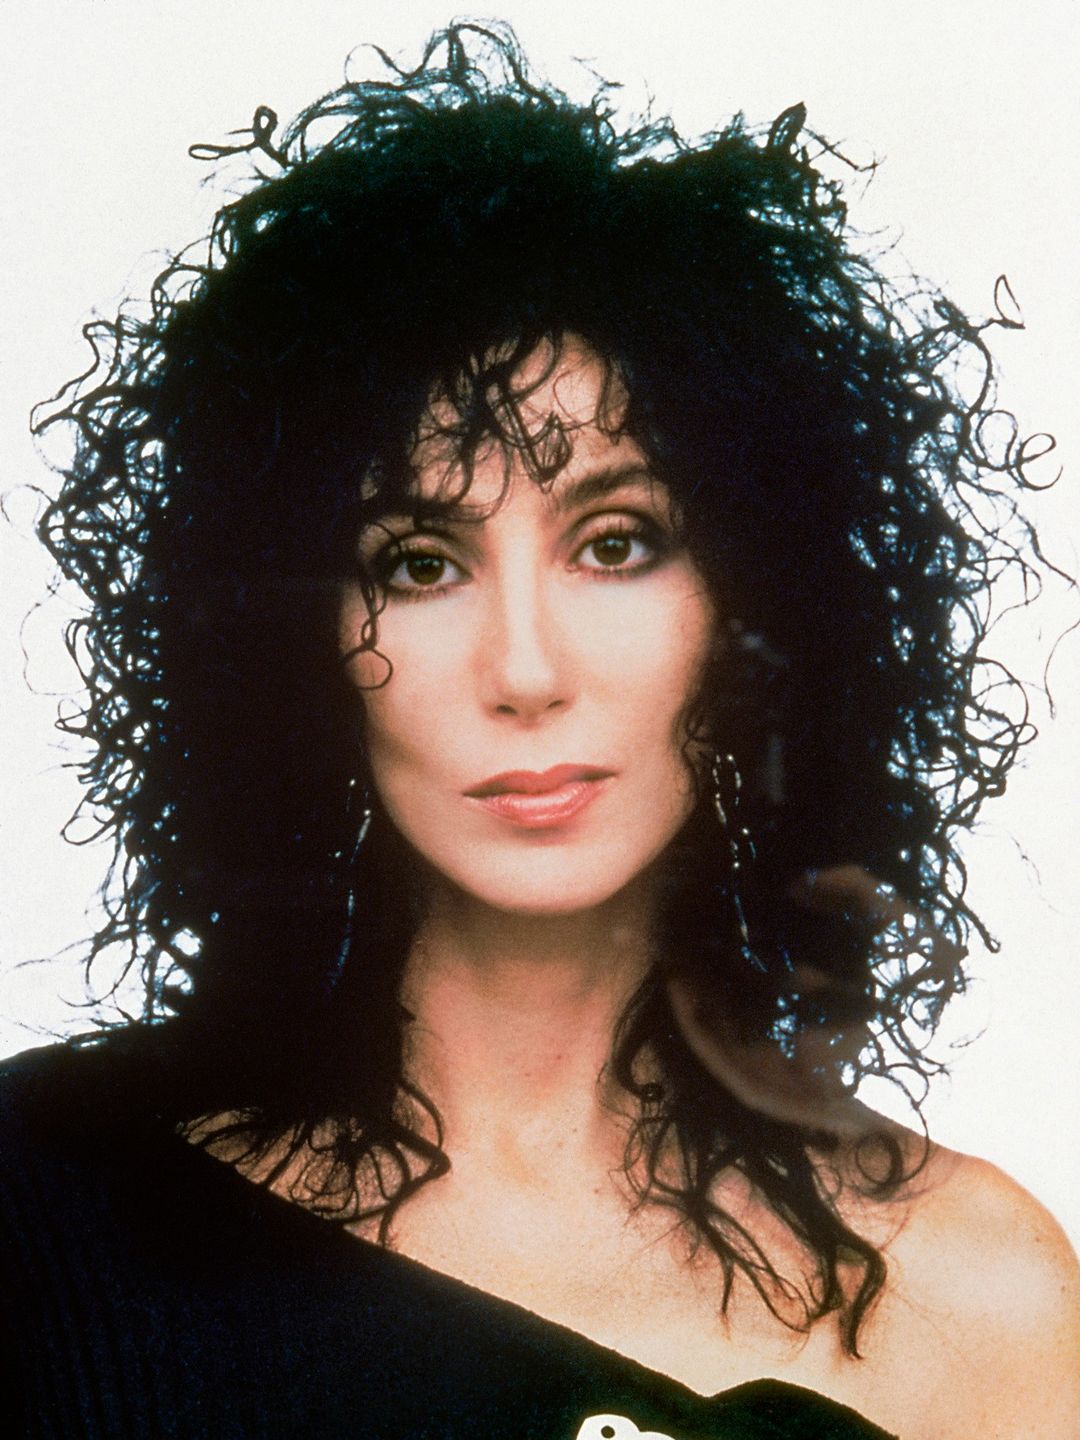 Cher interesting facts